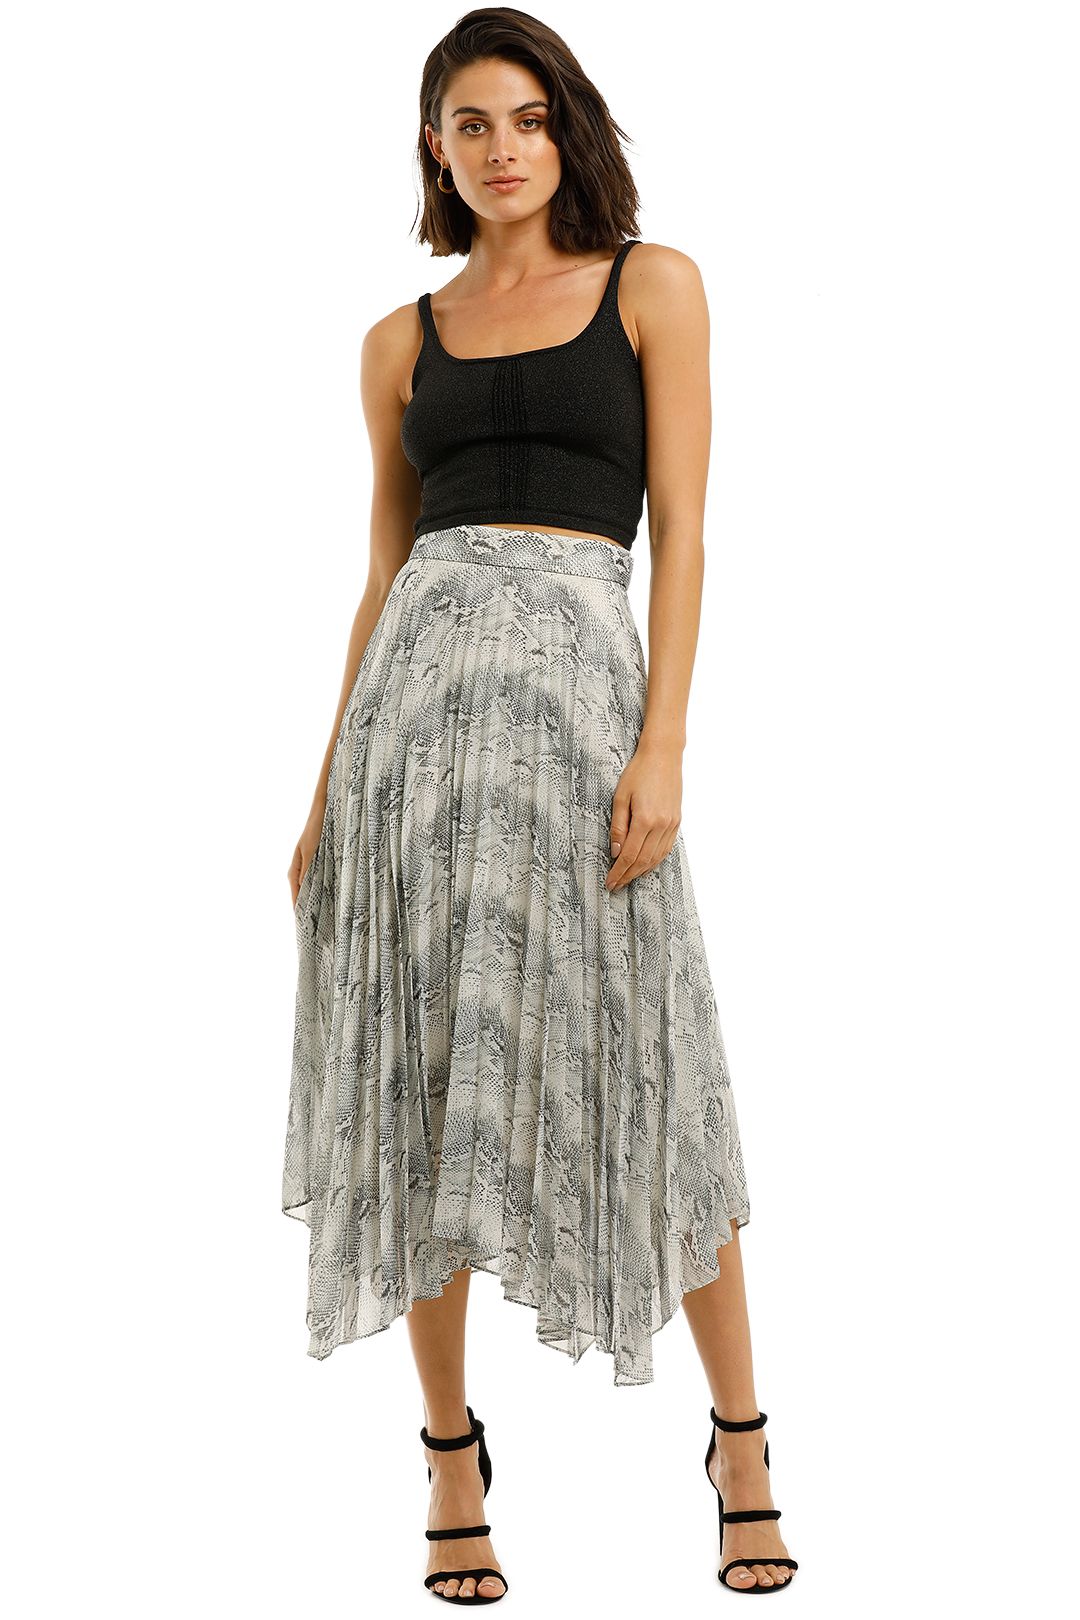 Camilla-and-Marc-Riley-Skirt-Snake-Print-Front